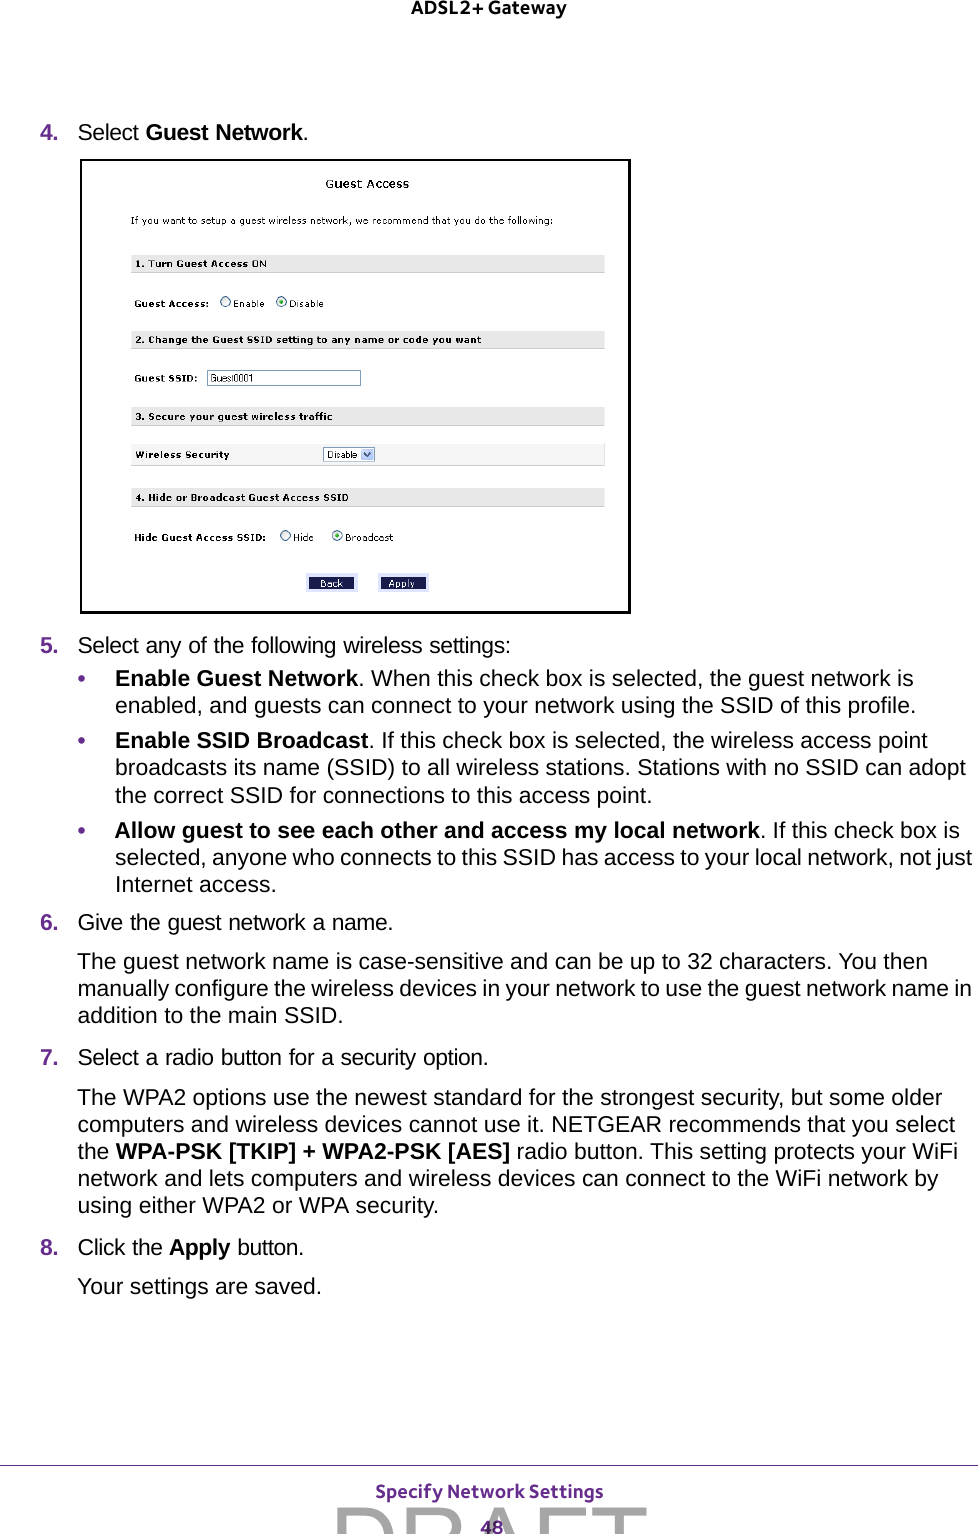 Specify Network Settings 48ADSL2+ Gateway 4.  Select Guest Network.5.  Select any of the following wireless settings:•Enable Guest Network. When this check box is selected, the guest network is enabled, and guests can connect to your network using the SSID of this profile.•Enable SSID Broadcast. If this check box is selected, the wireless access point broadcasts its name (SSID) to all wireless stations. Stations with no SSID can adopt the correct SSID for connections to this access point.•Allow guest to see each other and access my local network. If this check box is selected, anyone who connects to this SSID has access to your local network, not just Internet access.6.  Give the guest network a name.The guest network name is case-sensitive and can be up to 32 characters. You then manually configure the wireless devices in your network to use the guest network name in addition to the main SSID. 7.  Select a radio button for a security option. The WPA2 options use the newest standard for the strongest security, but some older computers and wireless devices cannot use it. NETGEAR recommends that you select the WPA-PSK [TKIP] + WPA2-PSK [AES] radio button. This setting protects your WiFi network and lets computers and wireless devices can connect to the WiFi network by using either WPA2 or WPA security.8.  Click the Apply button. Your settings are saved.DRAFT